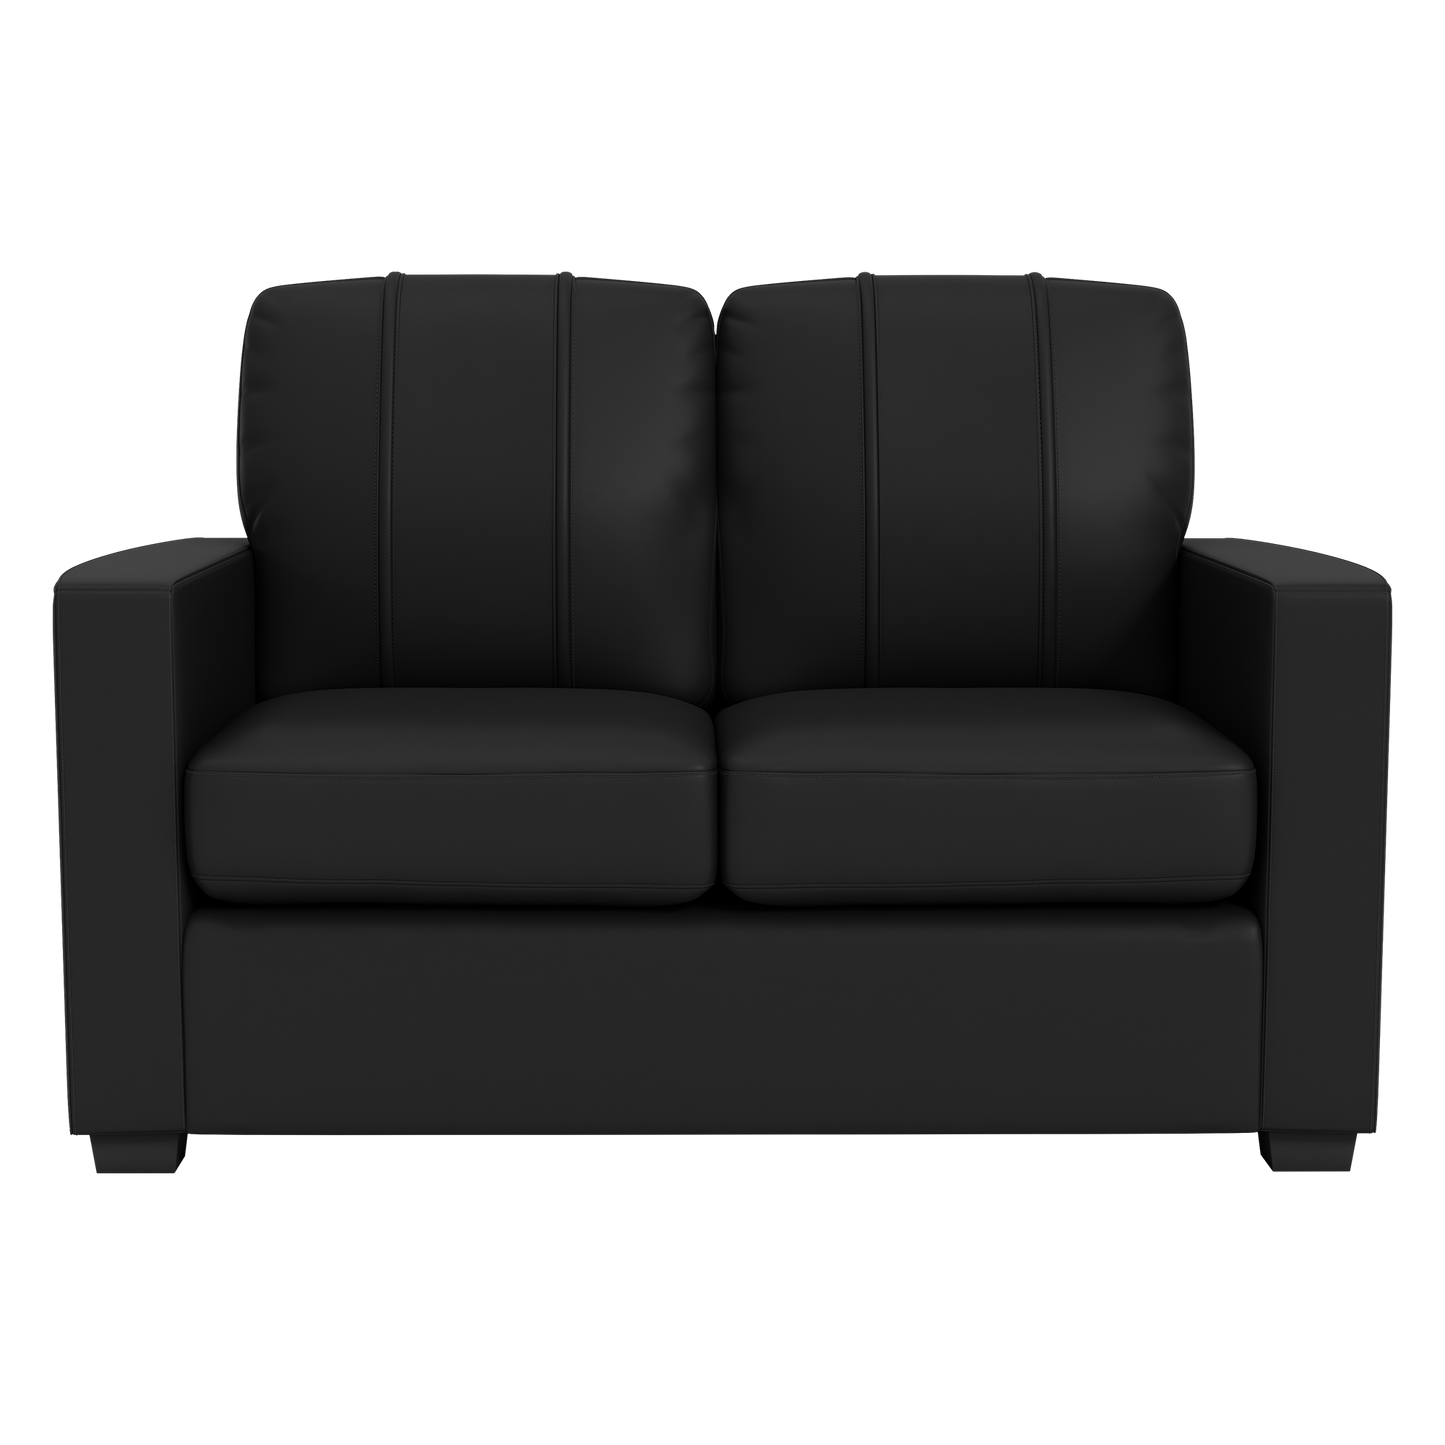 Silver Loveseat with Georgia State University Secondary Logo